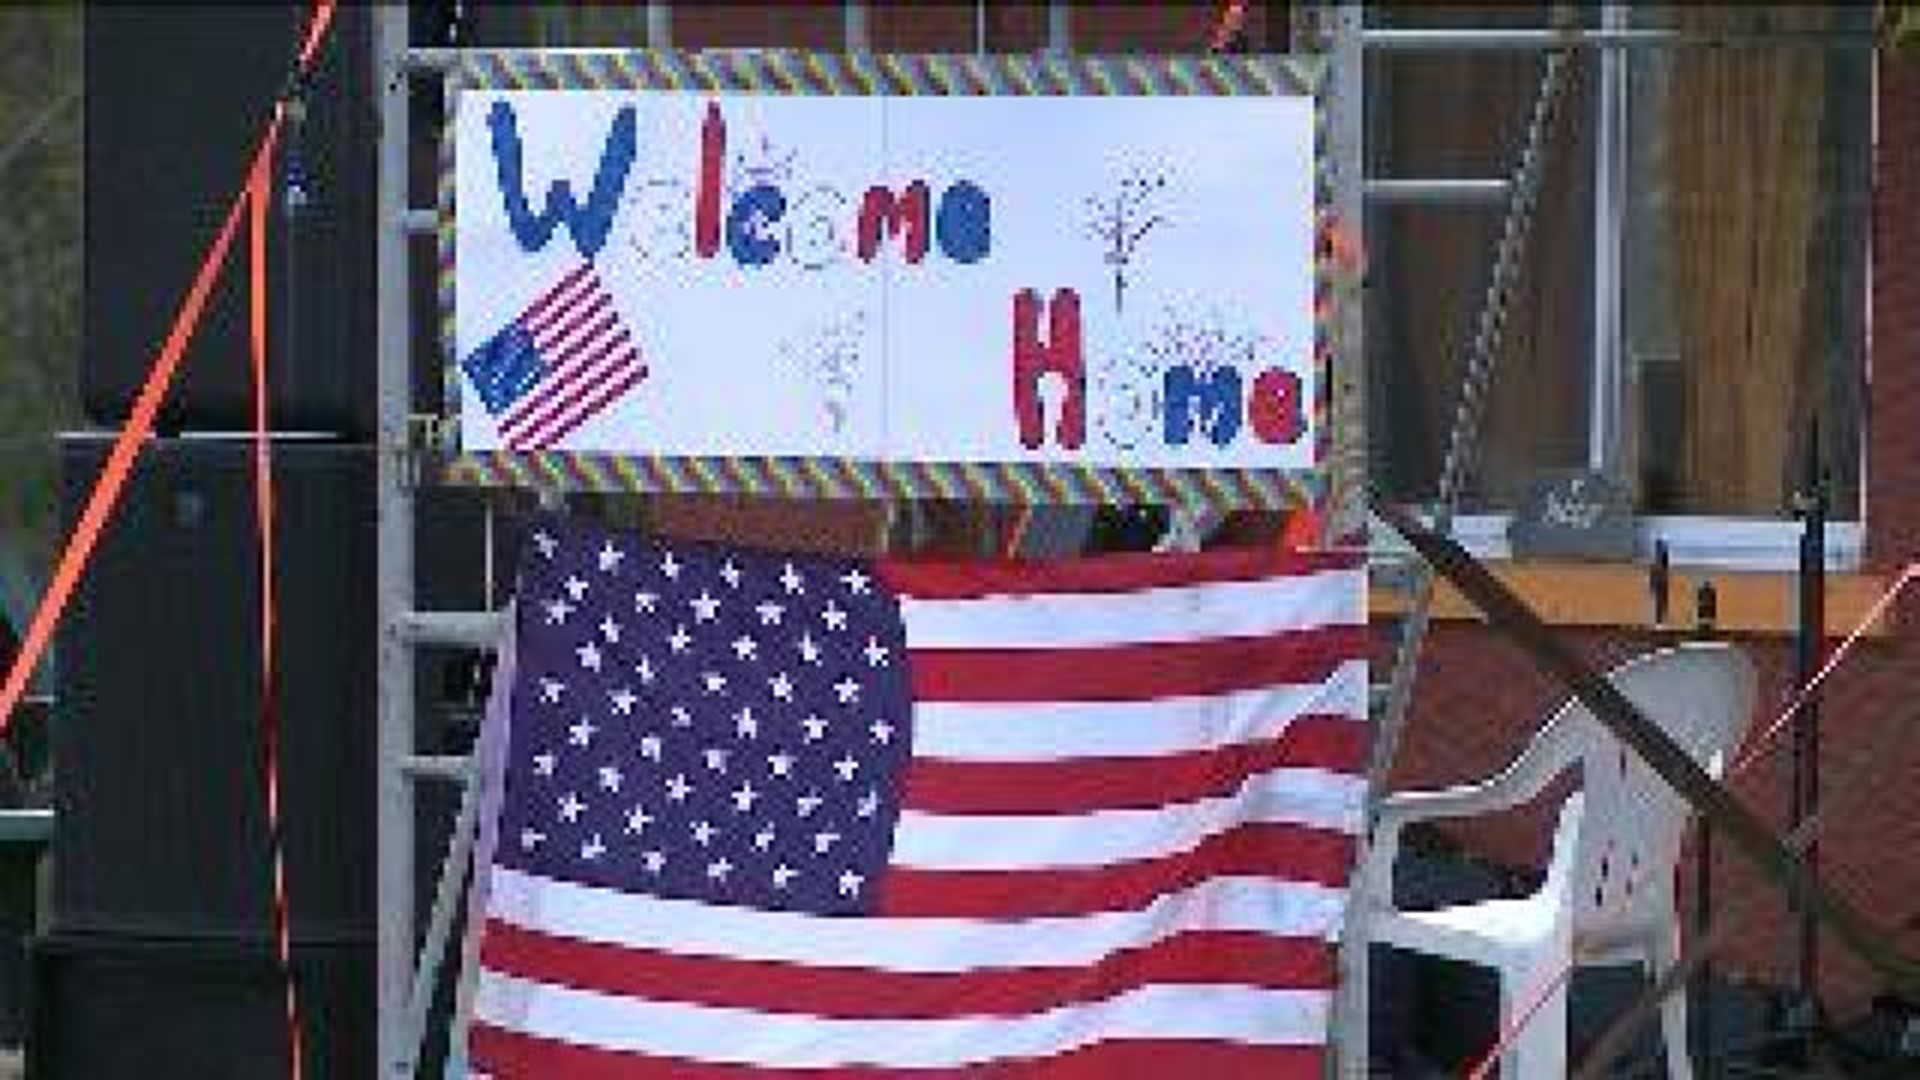 Welcoming Home Our Troops